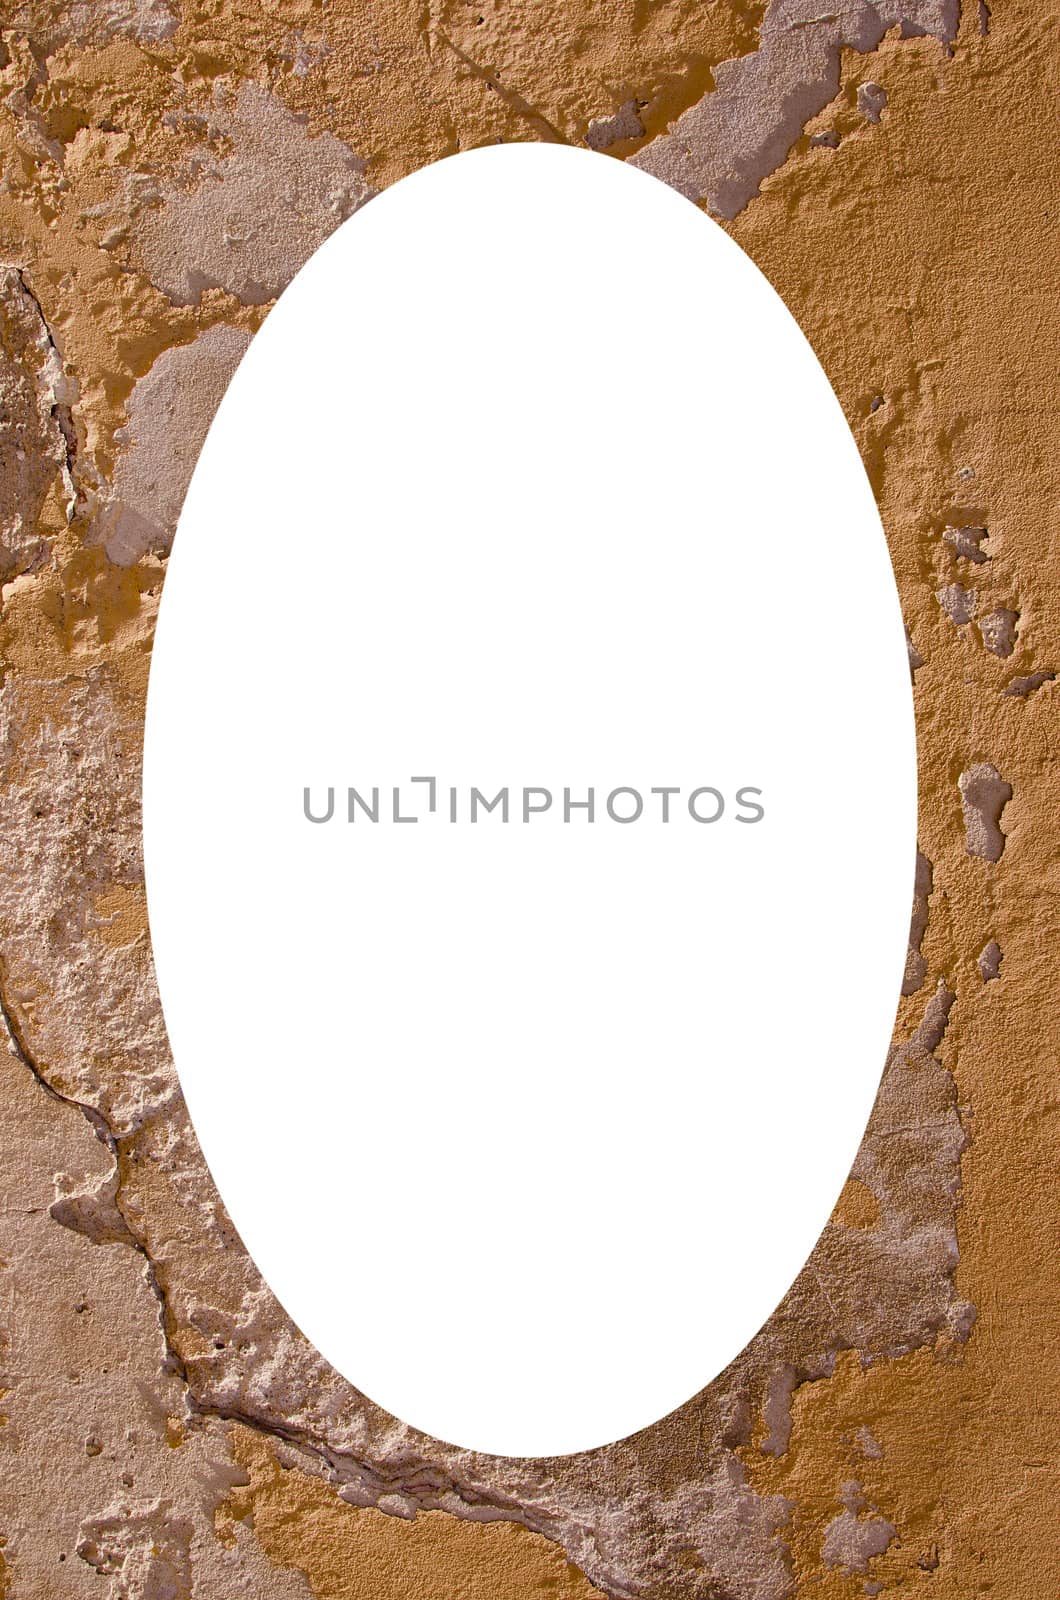 Old wall background and white oval in center by sauletas